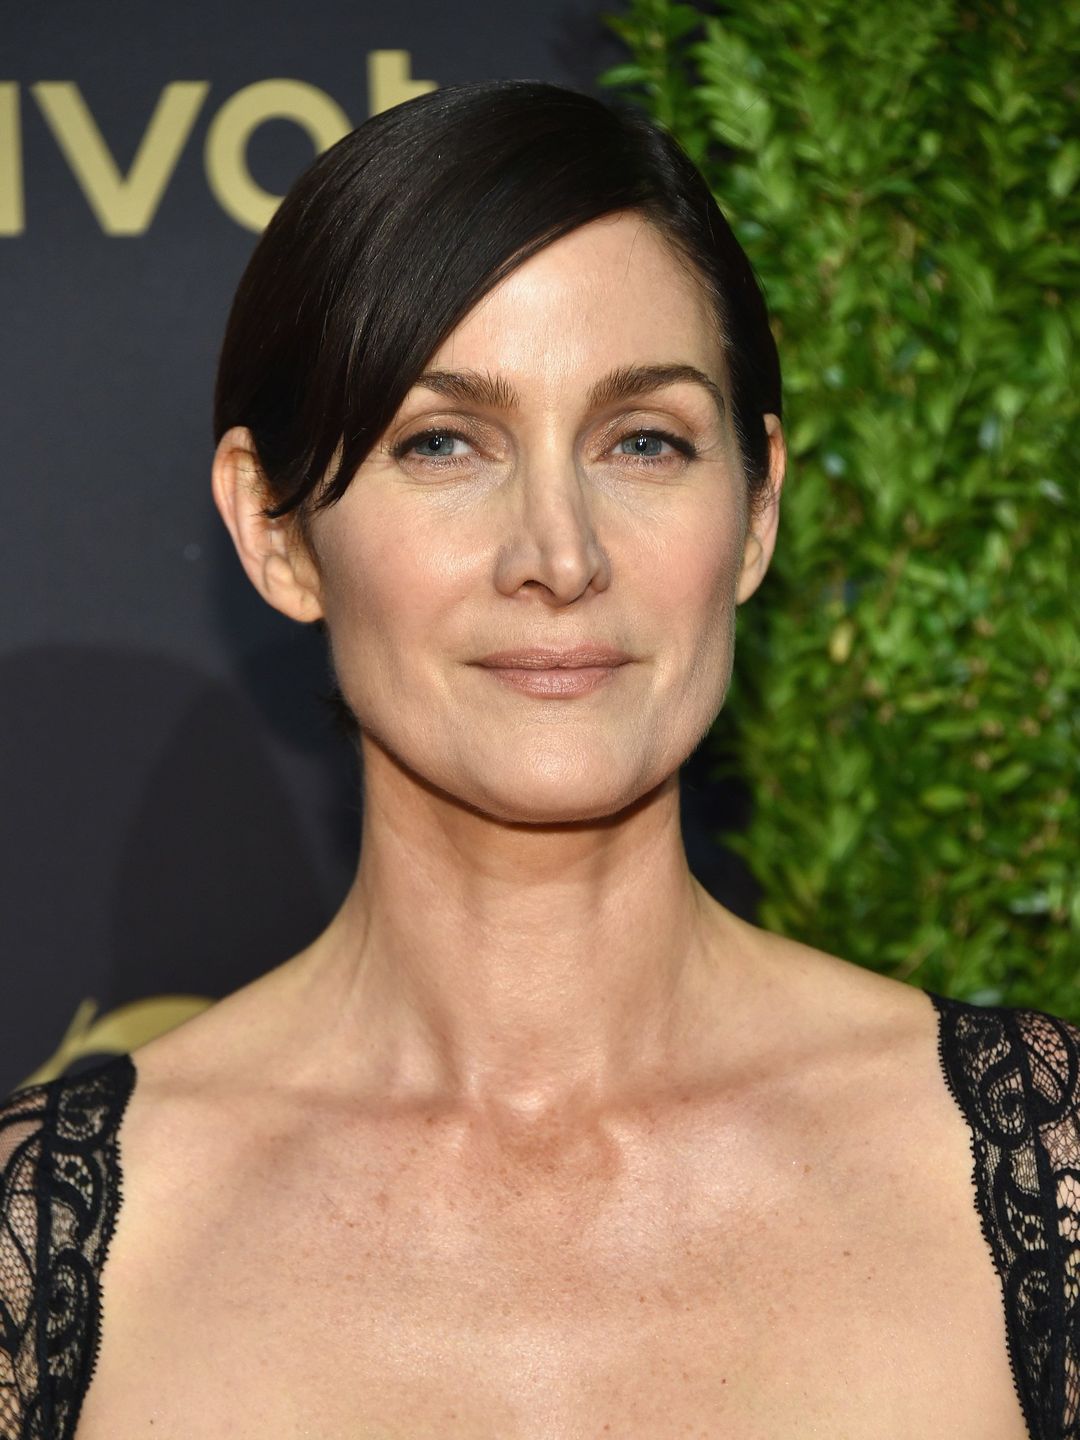 Carrie-Anne Moss parents